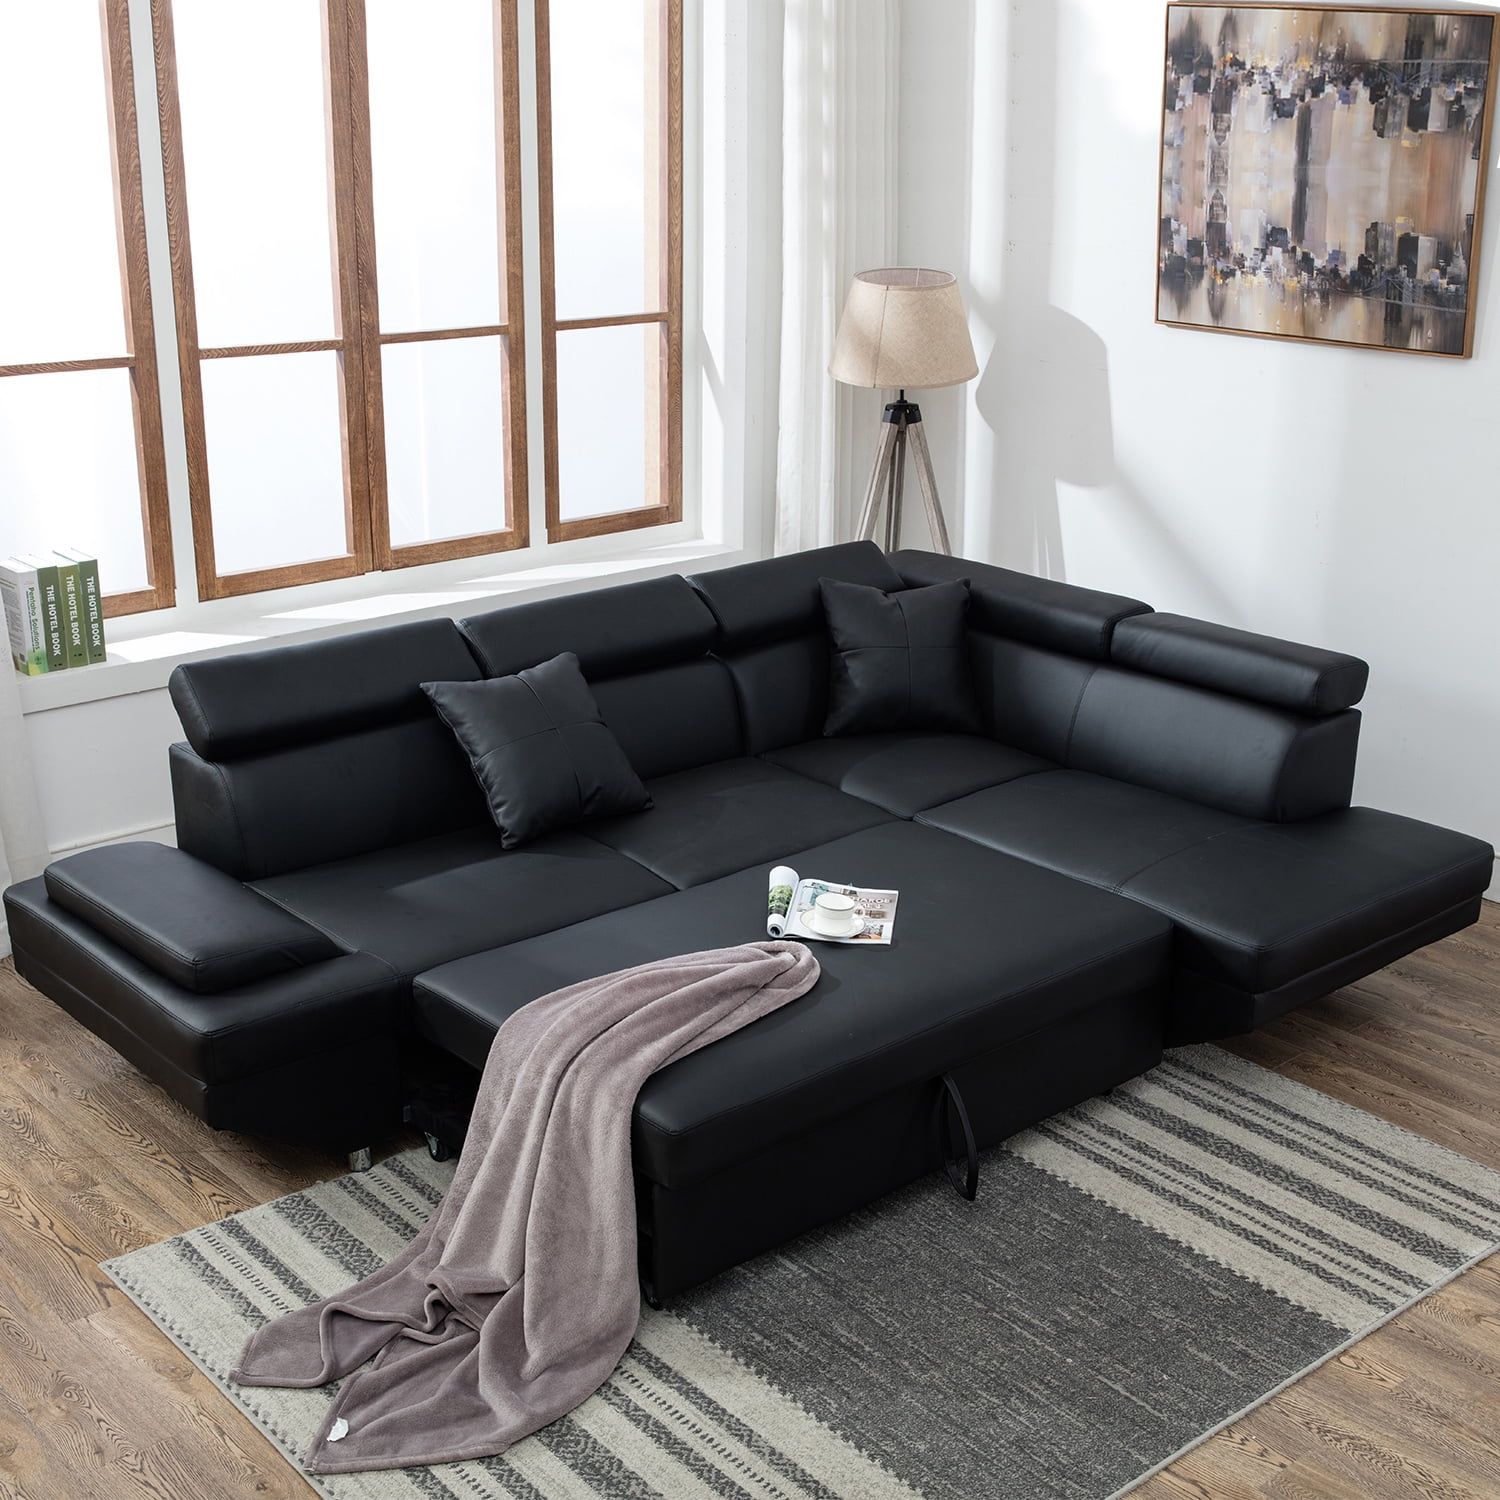 Contemporary Sectional Modern Sofa Bed – Black With Functional Armrest Intended For Sofas In Black (View 20 of 20)